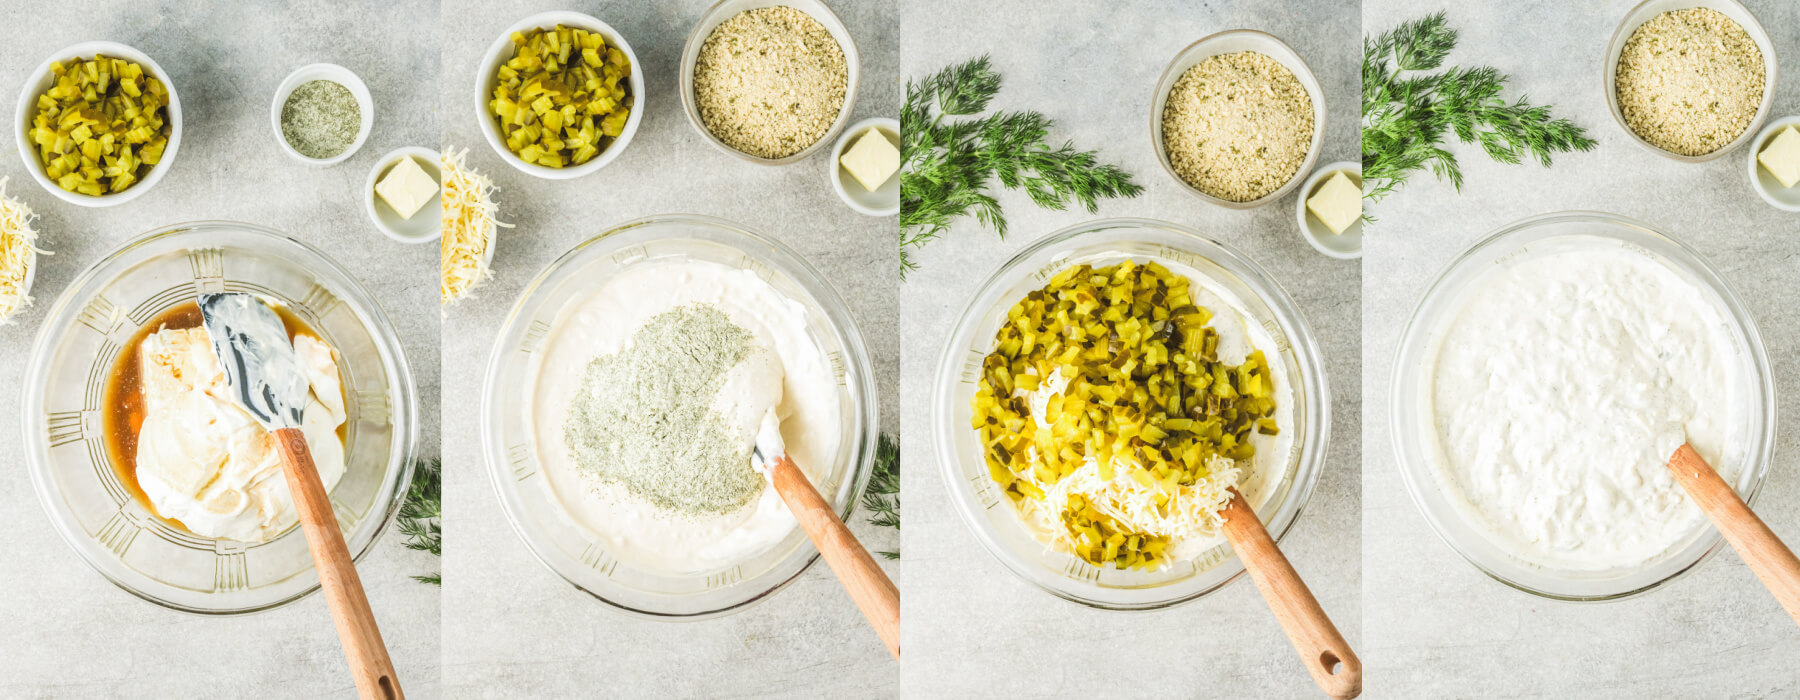 A series of process images showing how to mix up dill pickle dip.